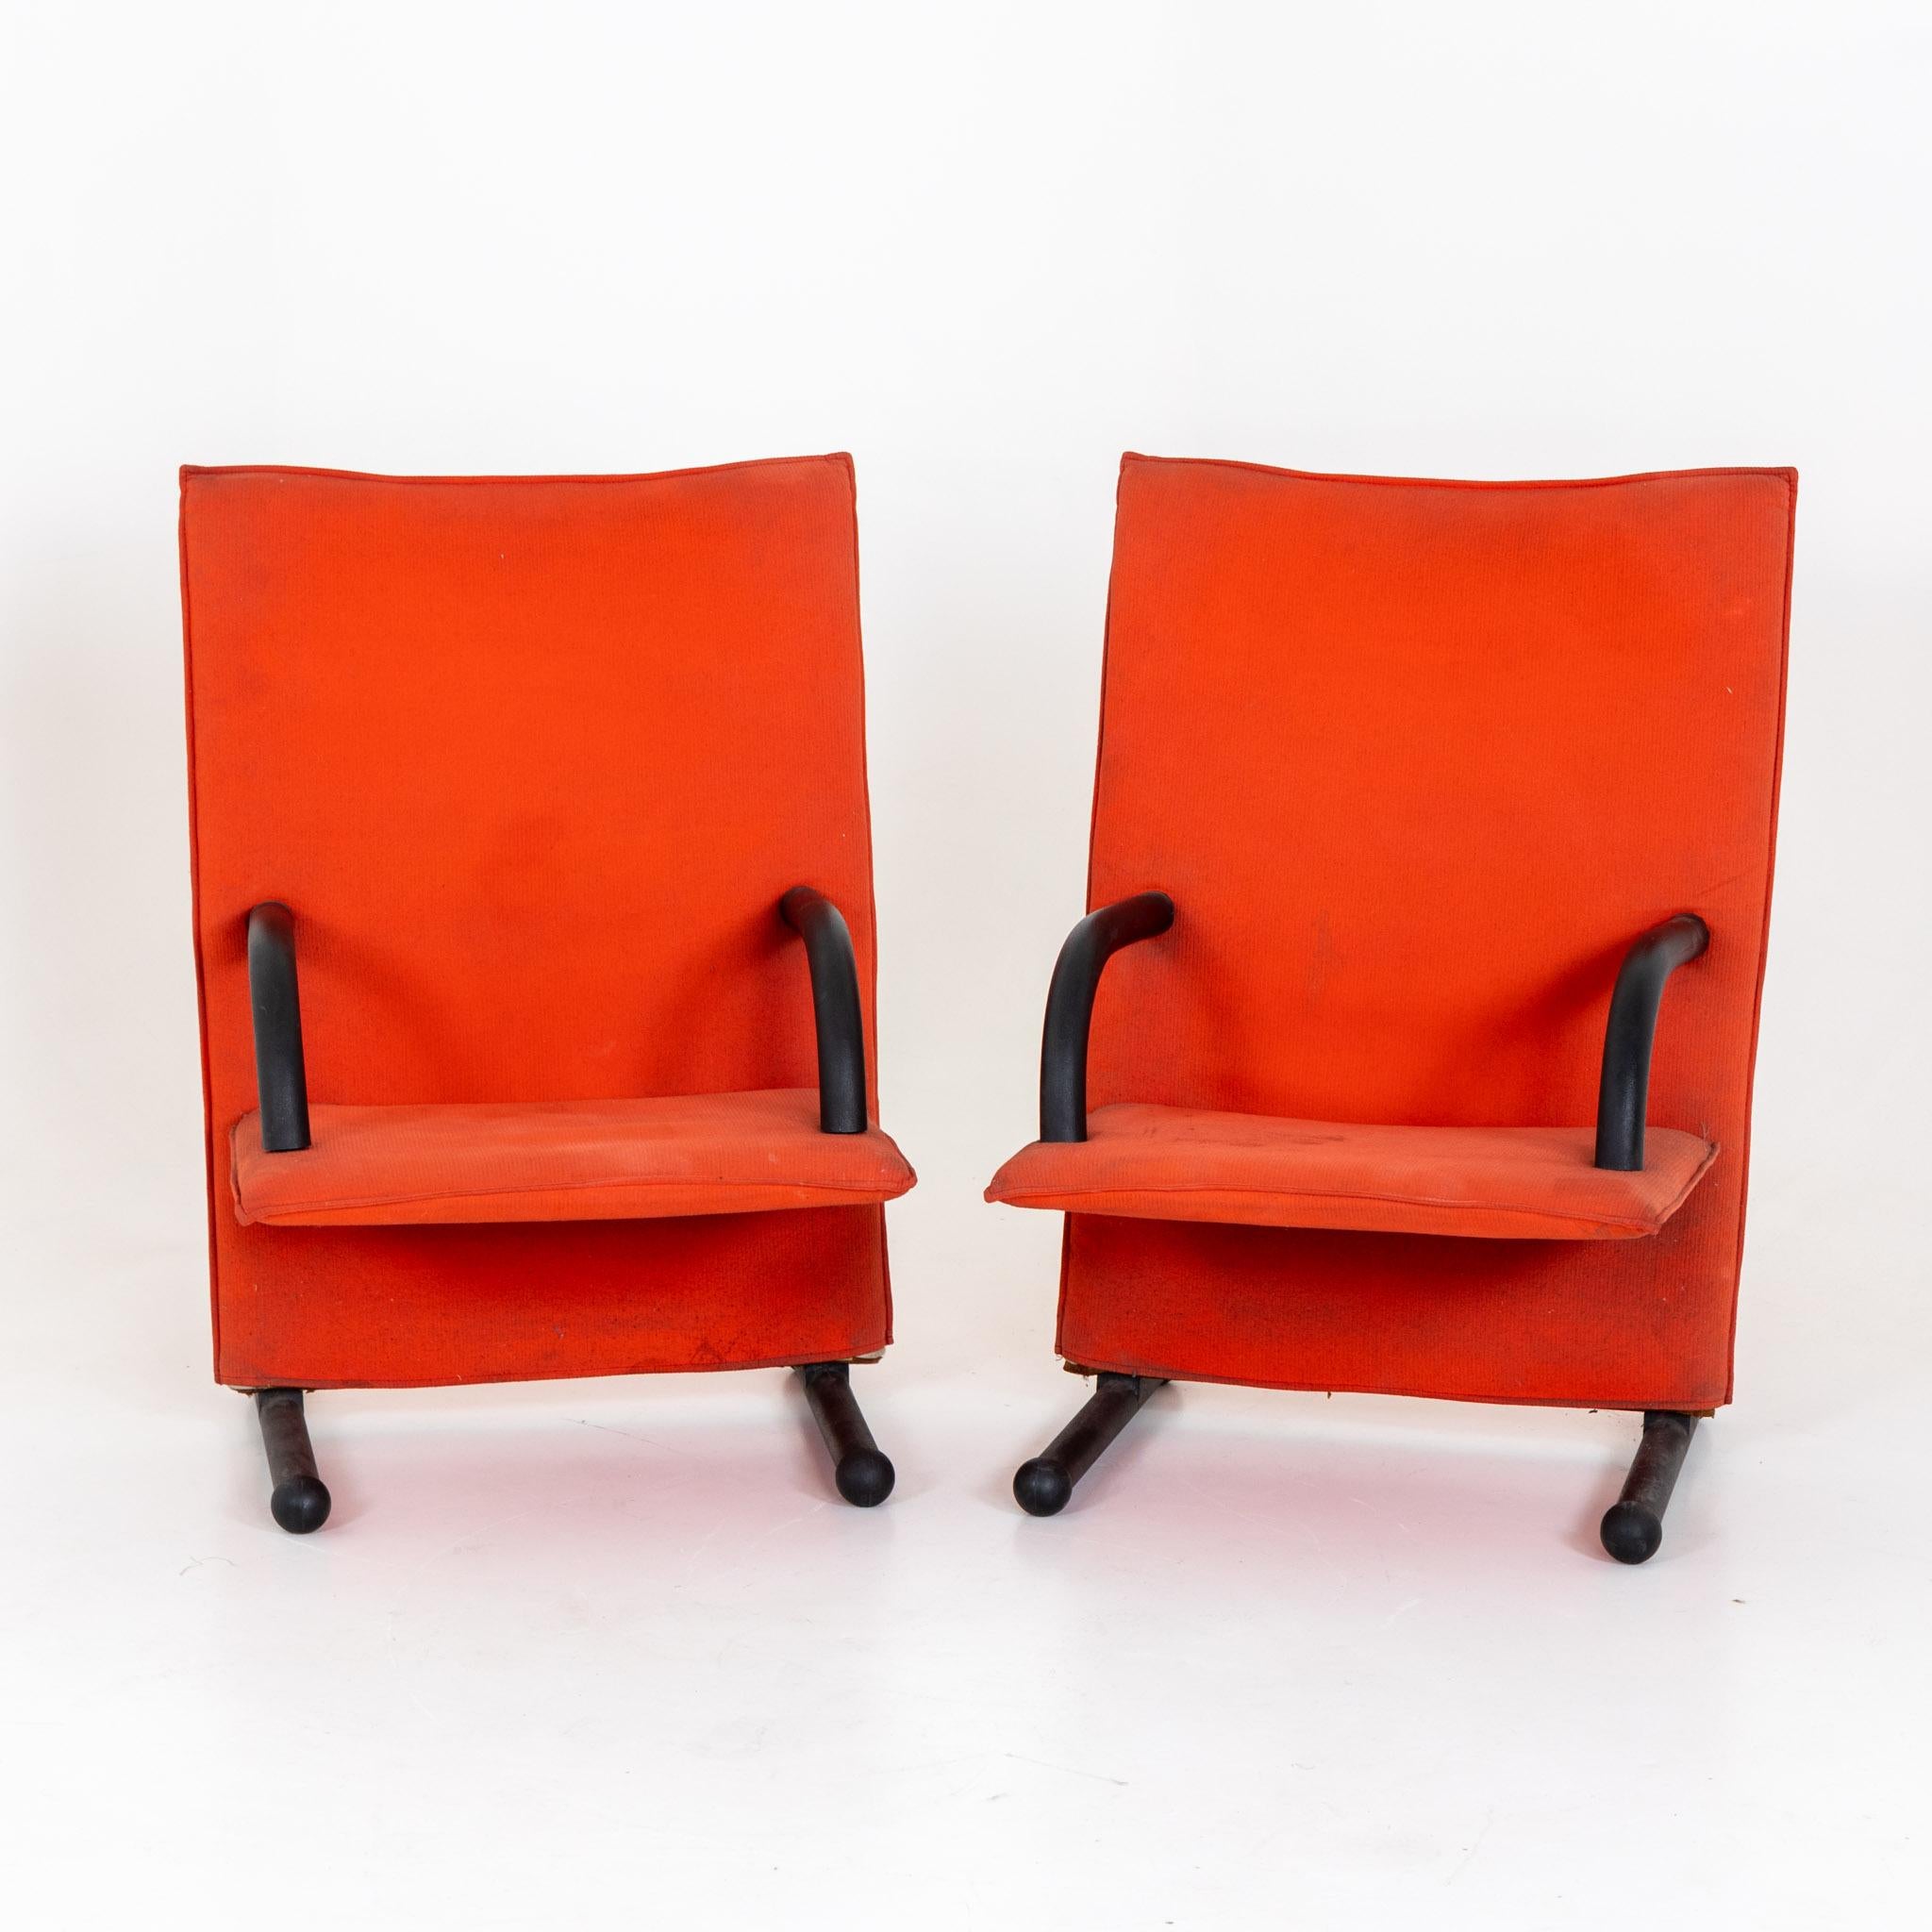 Pair of T-Line arm chairs with black metal frame and red cover by Burkhard Vogtherr for Arflex. Signs of age and use.